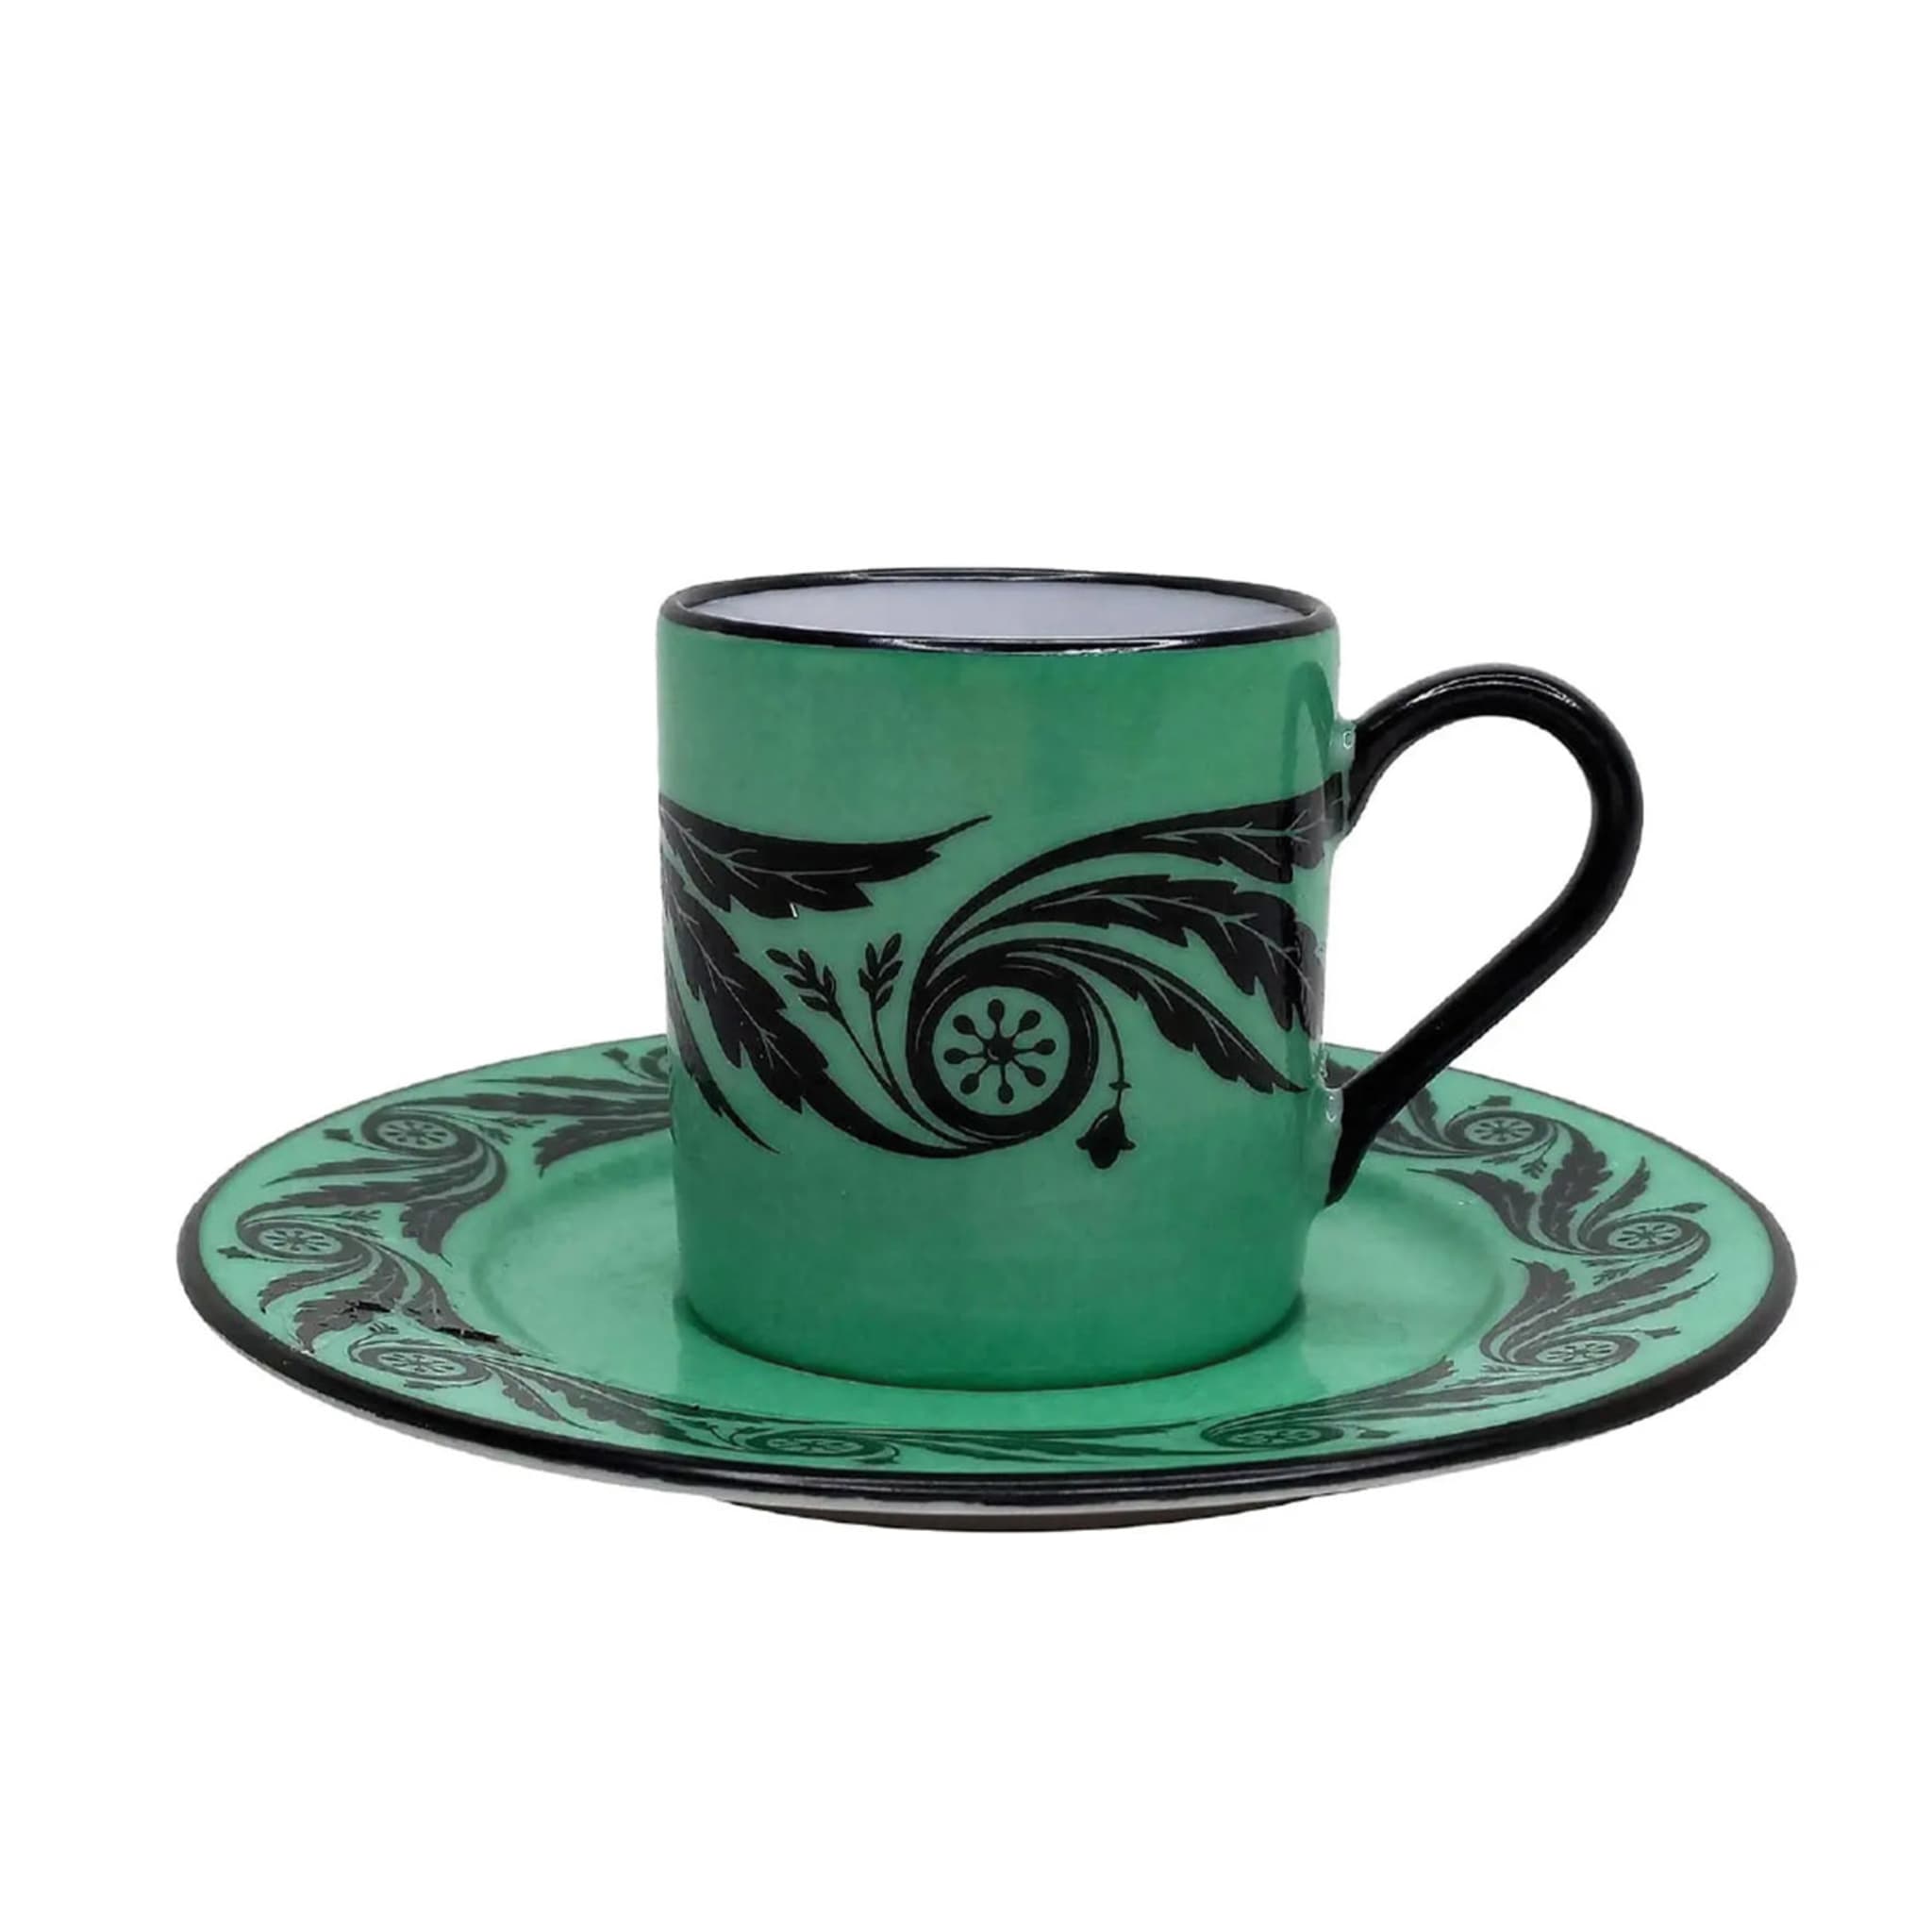 Crisalide Set of 4 Green Coffee Cups with Saucers - Main view